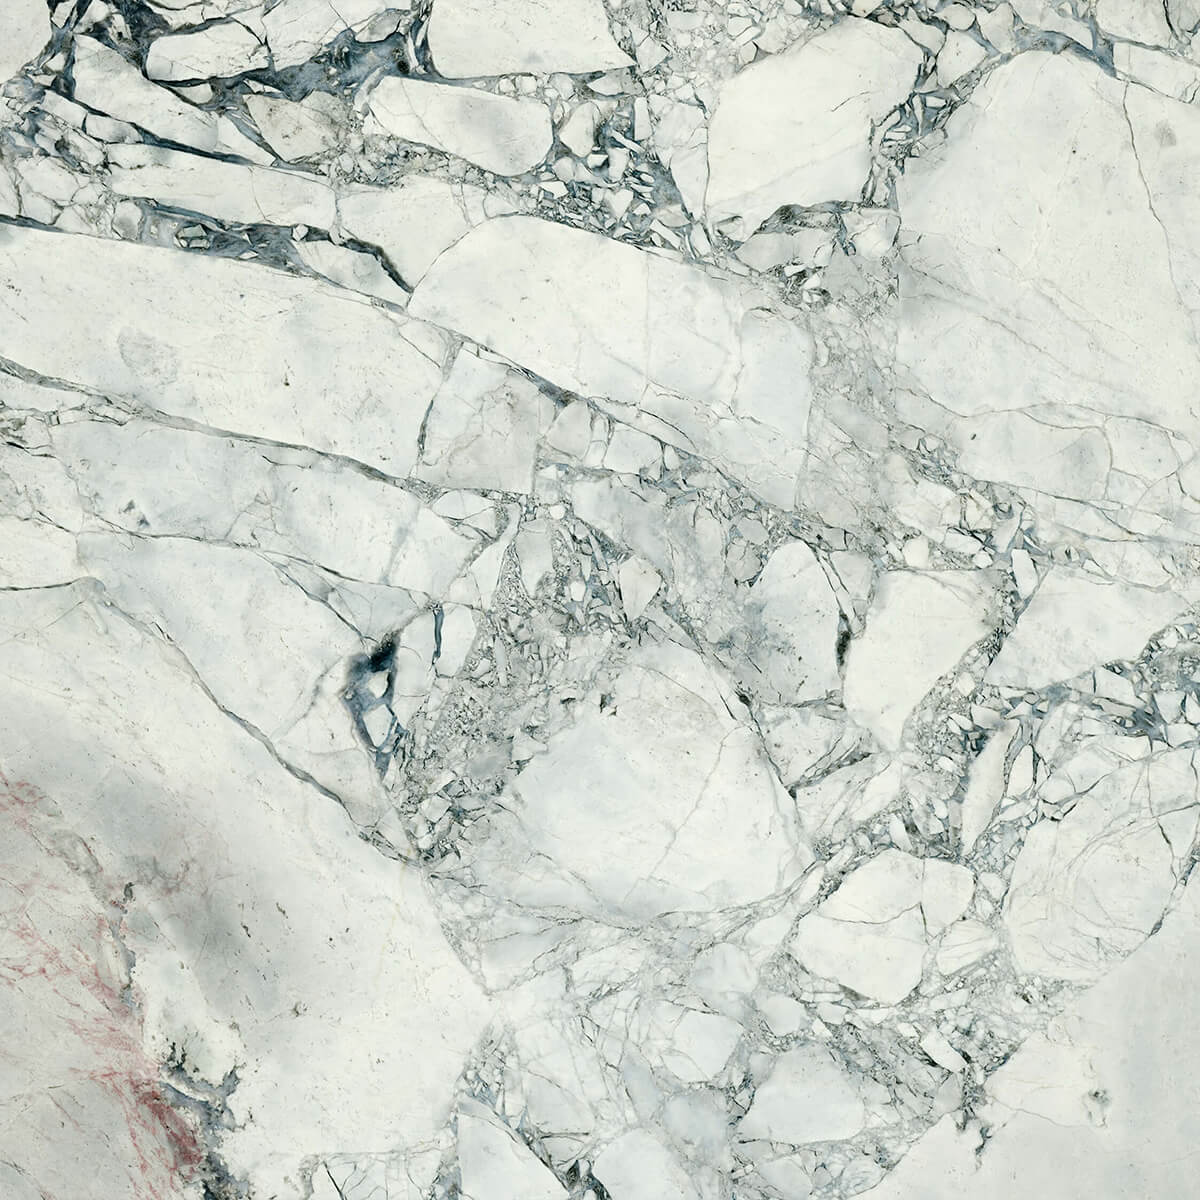 Textured grey marble